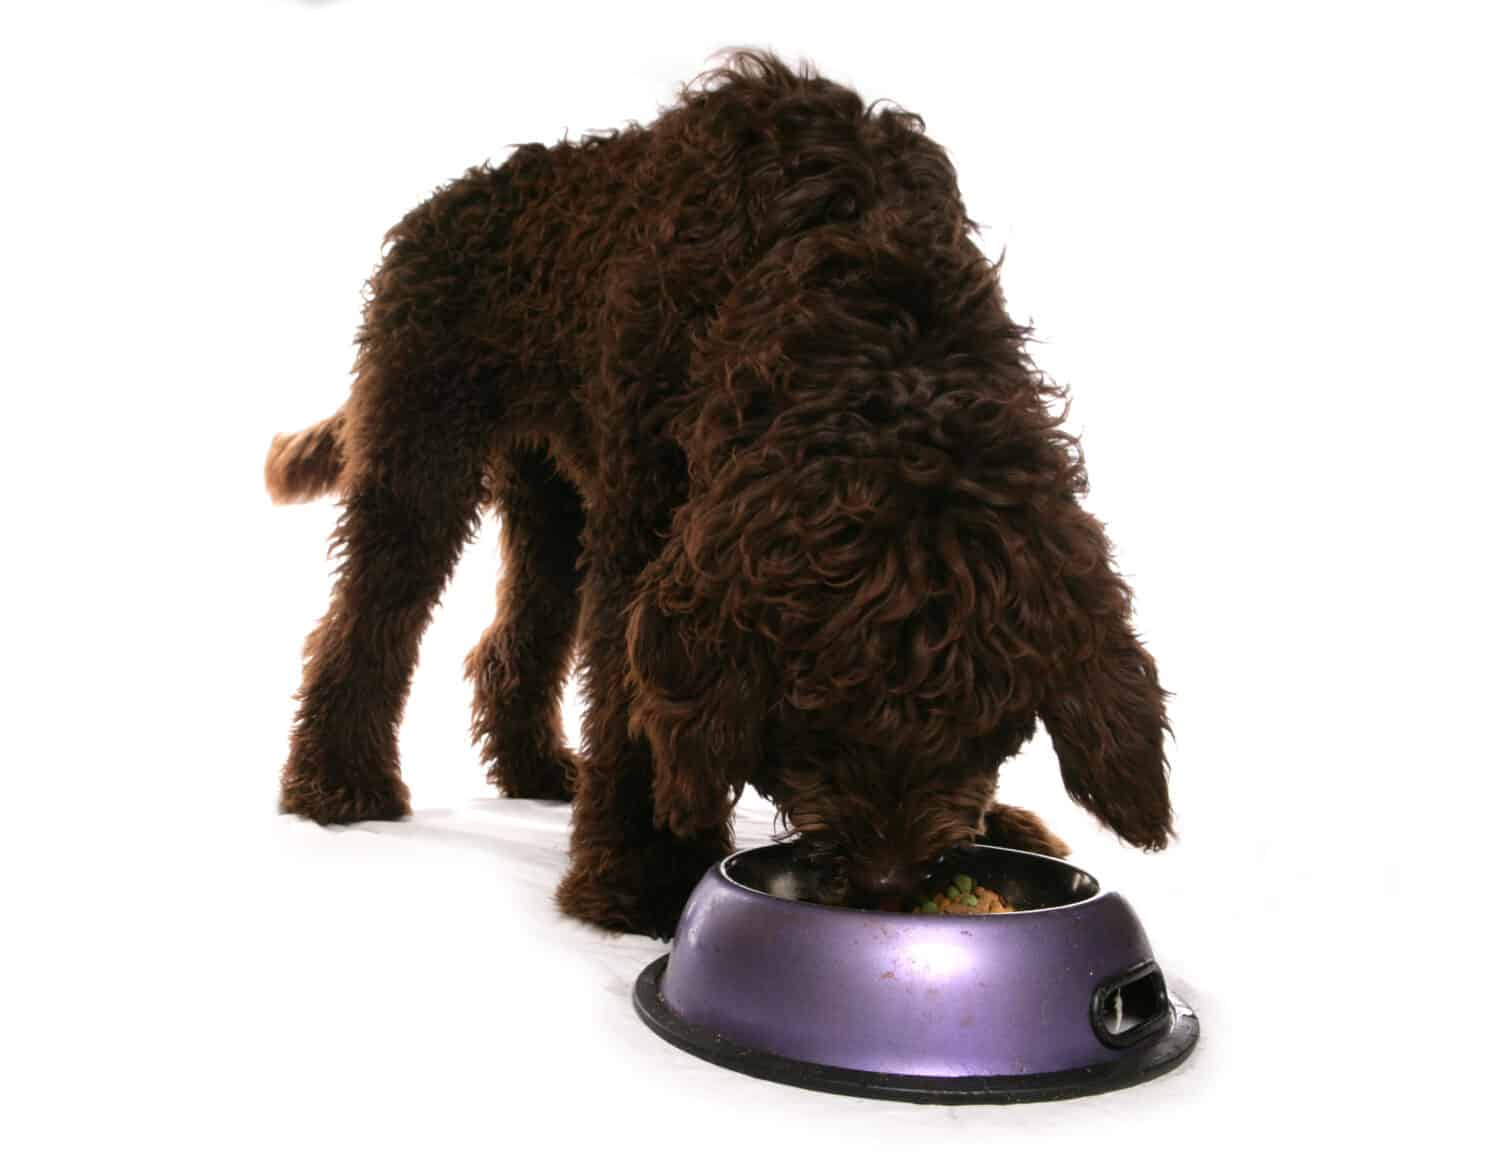 Brown Labradoodle Puppy eating from a bowl isolated on a white background